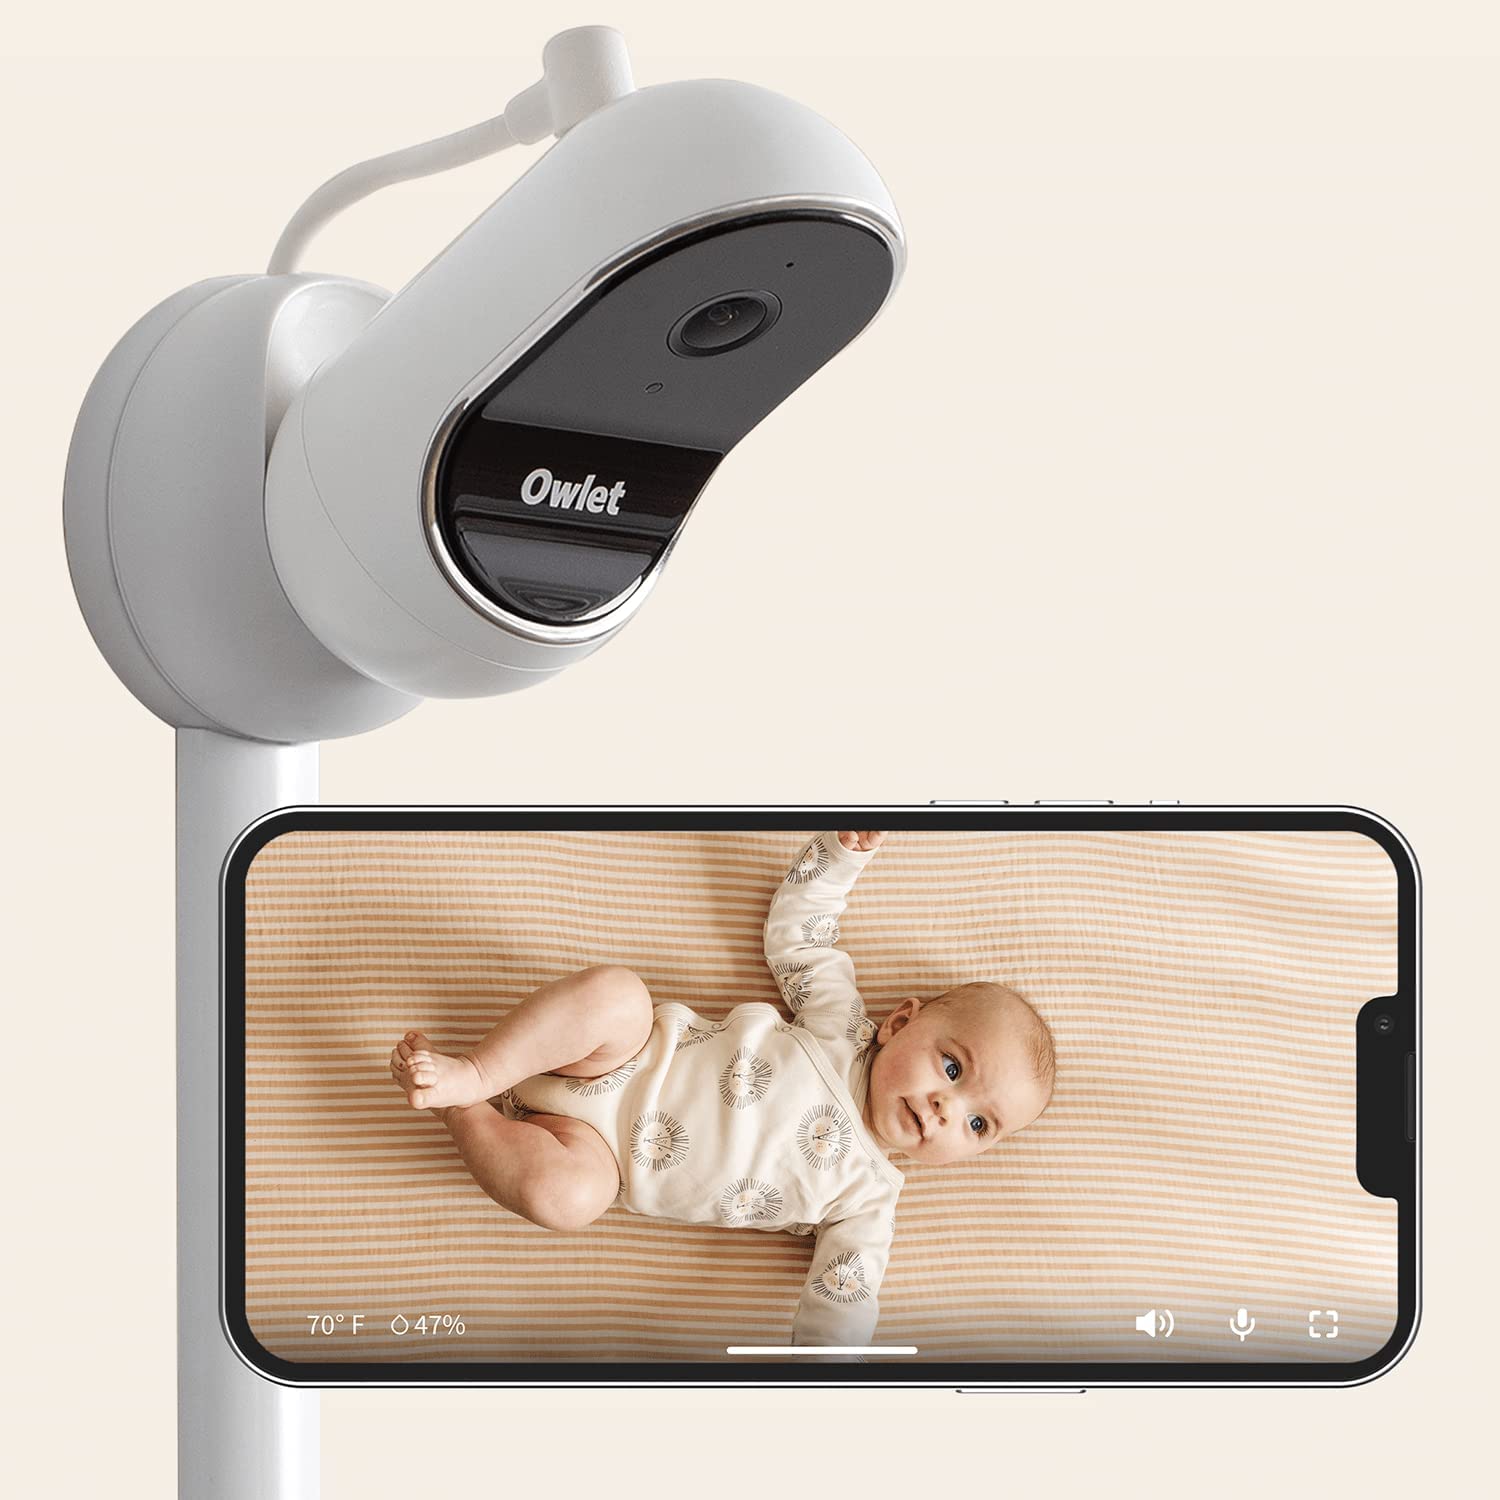 Owlet Cam Smart Baby HD Video Monitor with Camera, Encrypted WiFi, Motion & Sound Notifications, Humidity, Room Temp, Night Vision, 2-Way Talk, White